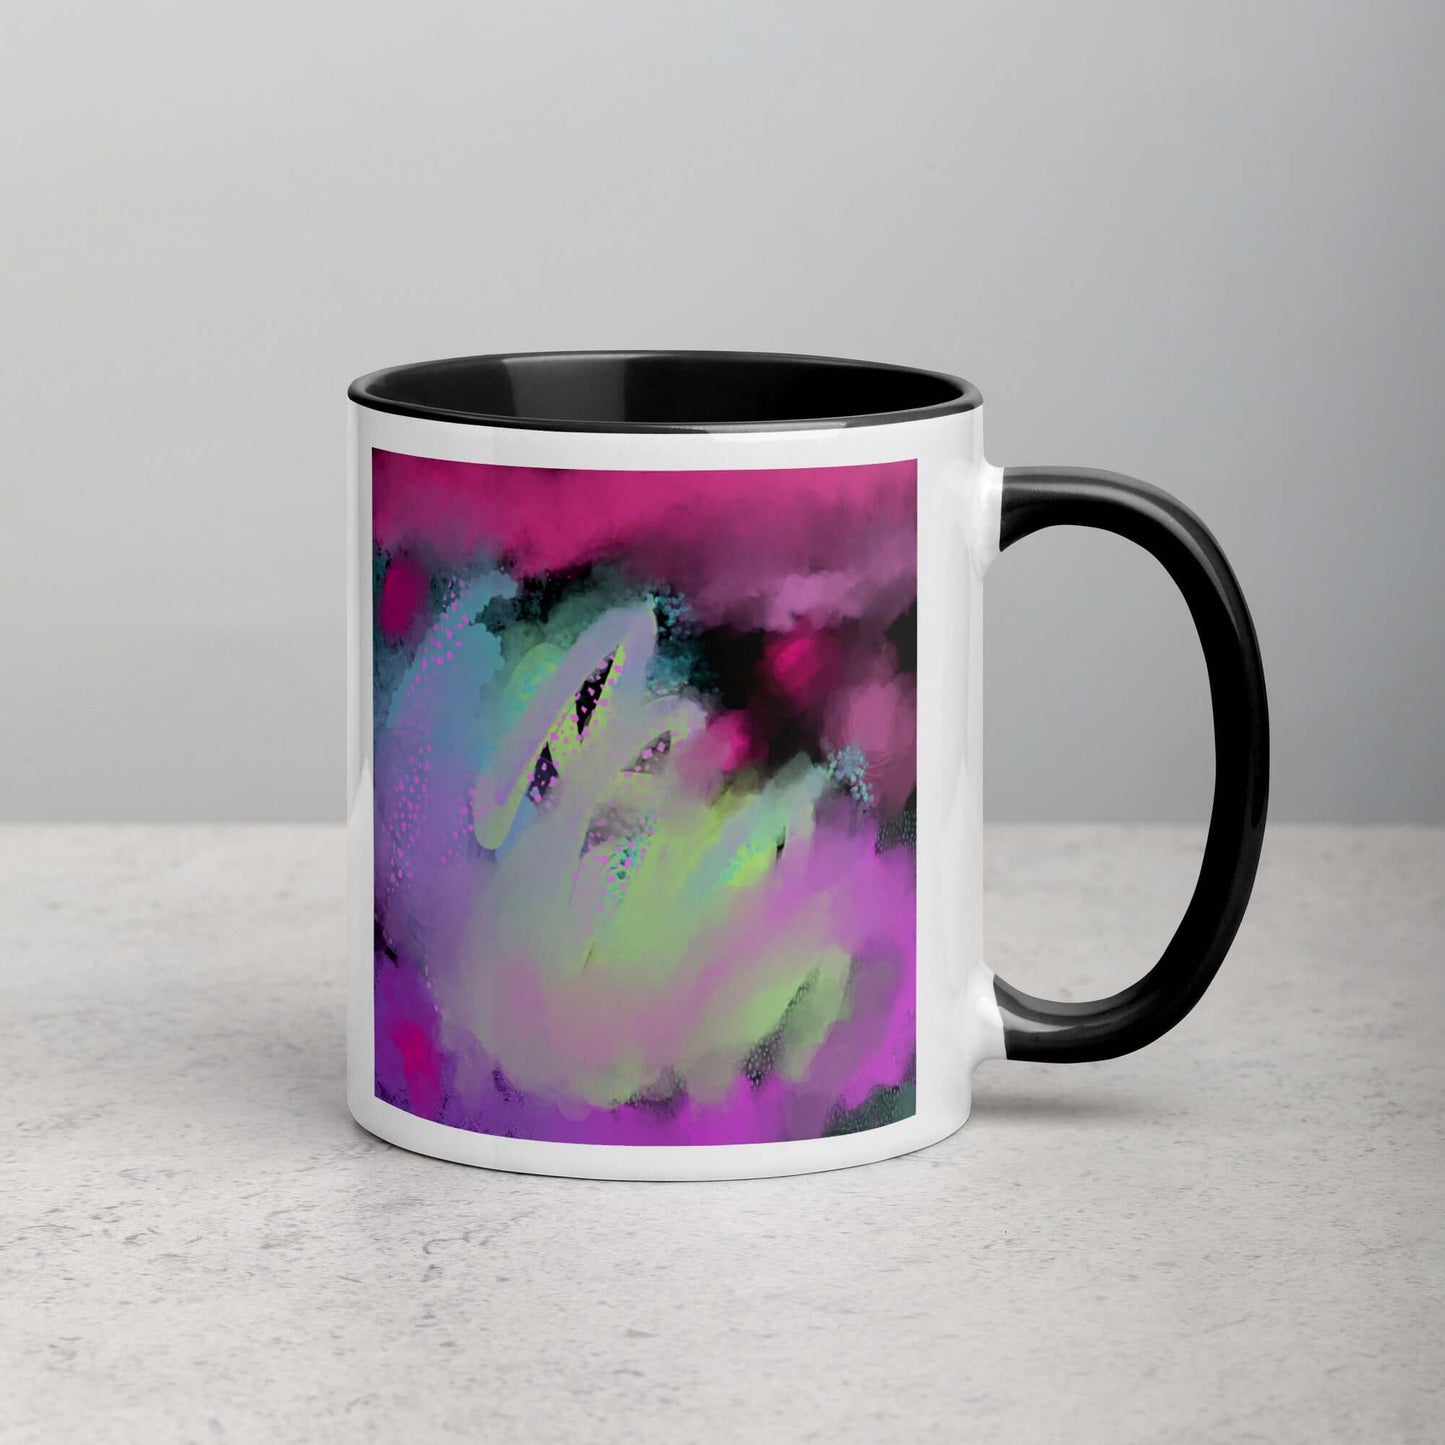 Magenta, Mint Green and Purples “Viva Magenta” Abstract Art Mug with Black Color Inside Right Handed Front View